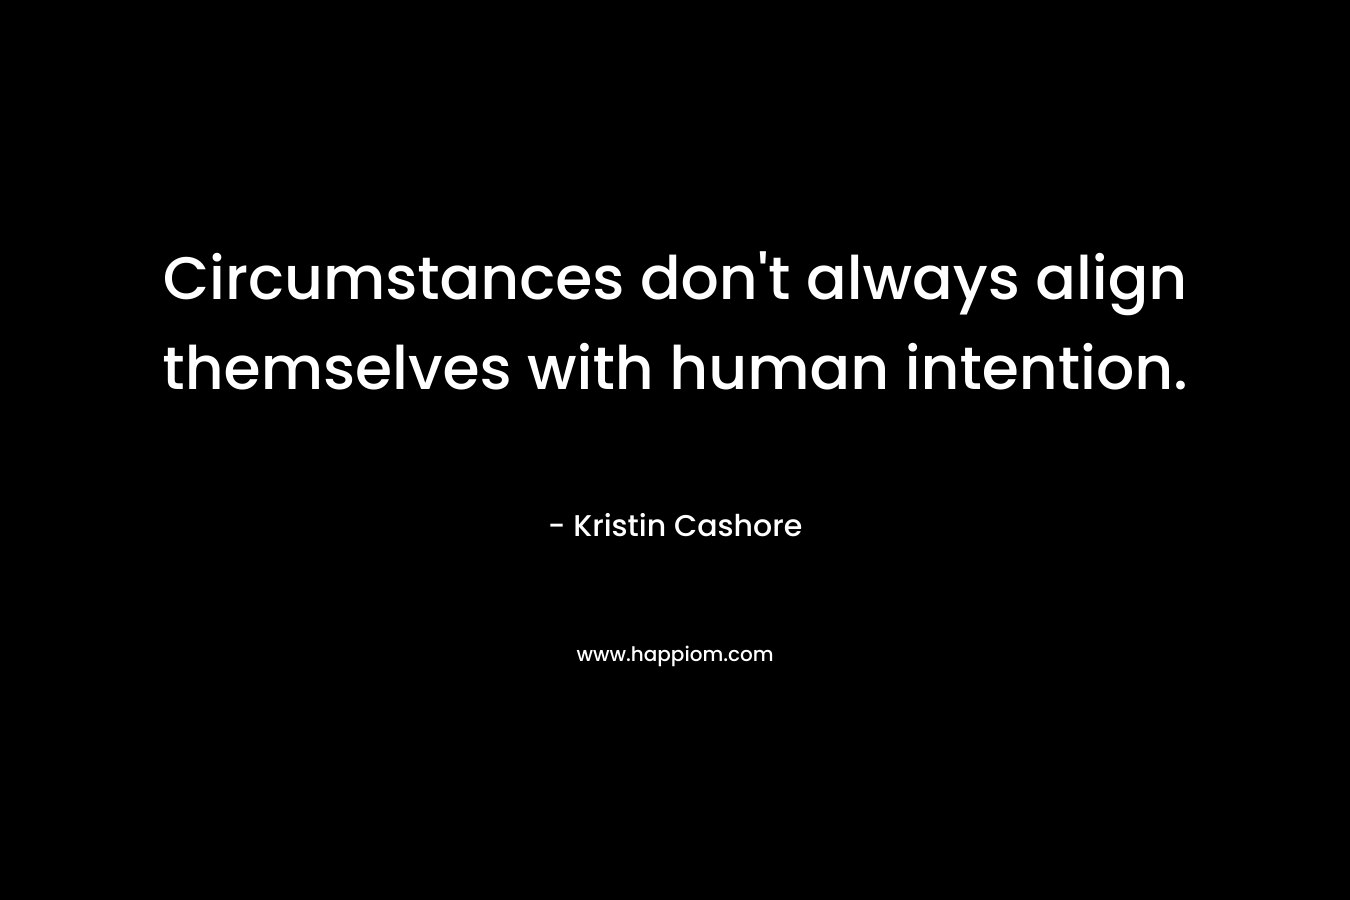 Circumstances don't always align themselves with human intention.